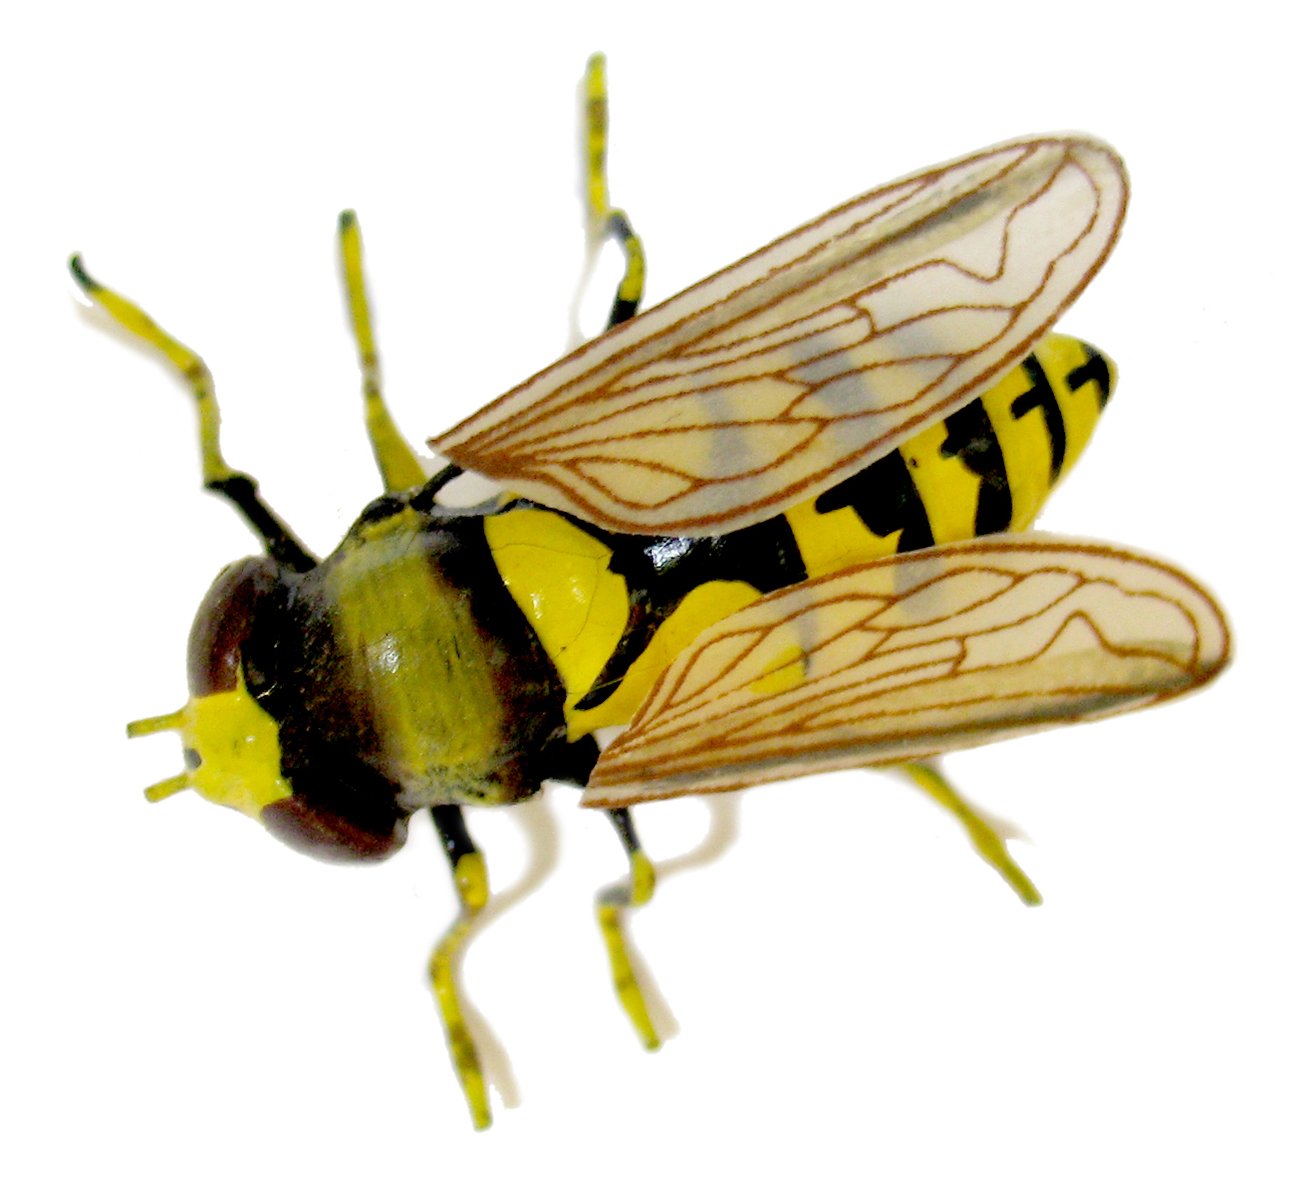 a close up of a black and yellow insect